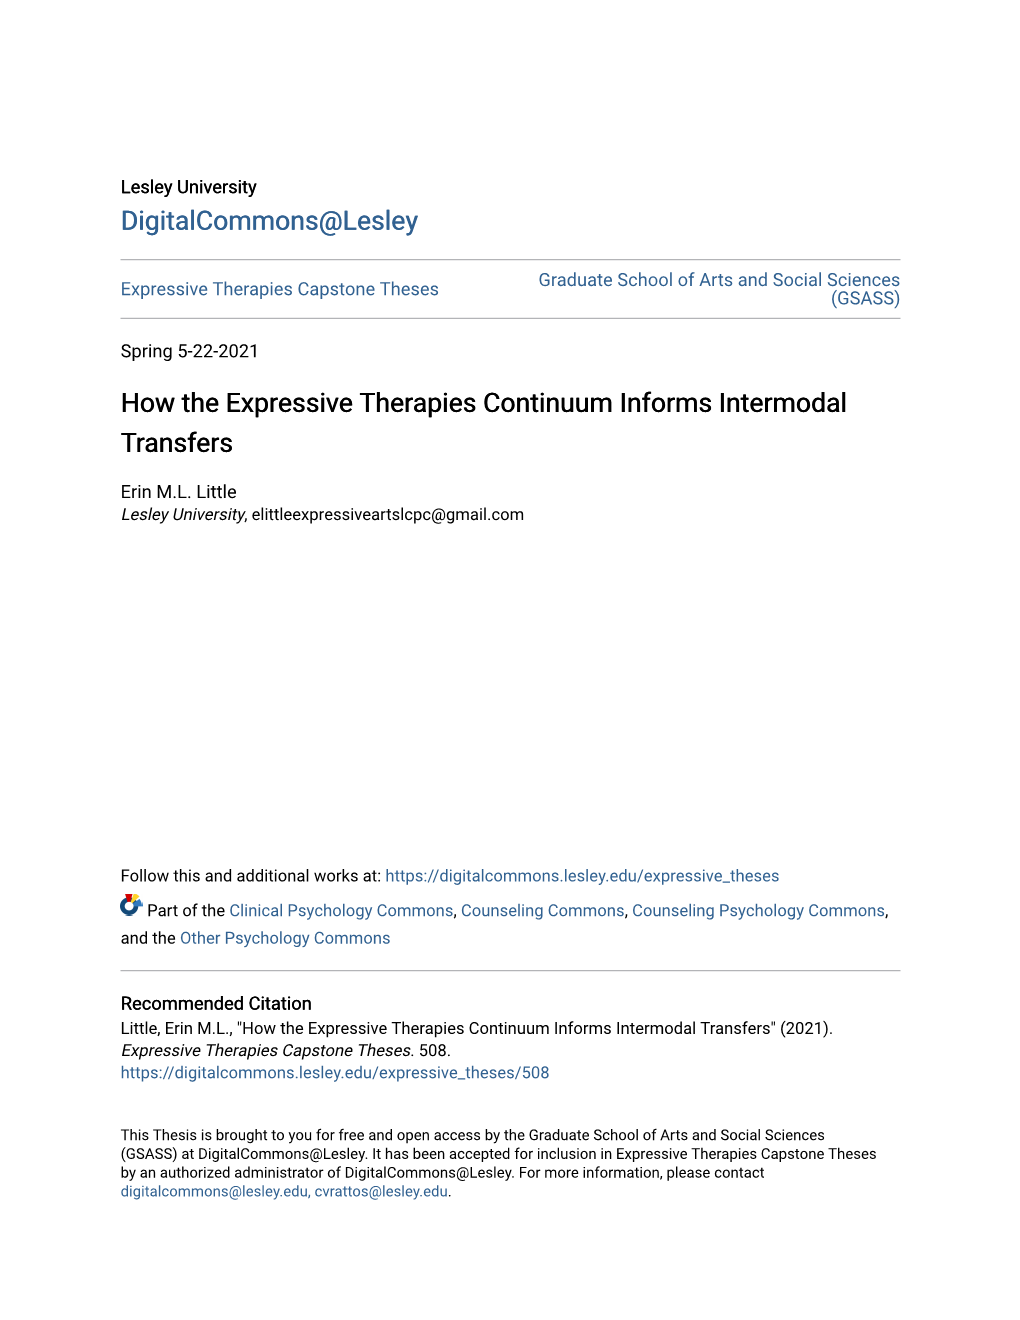 How the Expressive Therapies Continuum Informs Intermodal Transfers